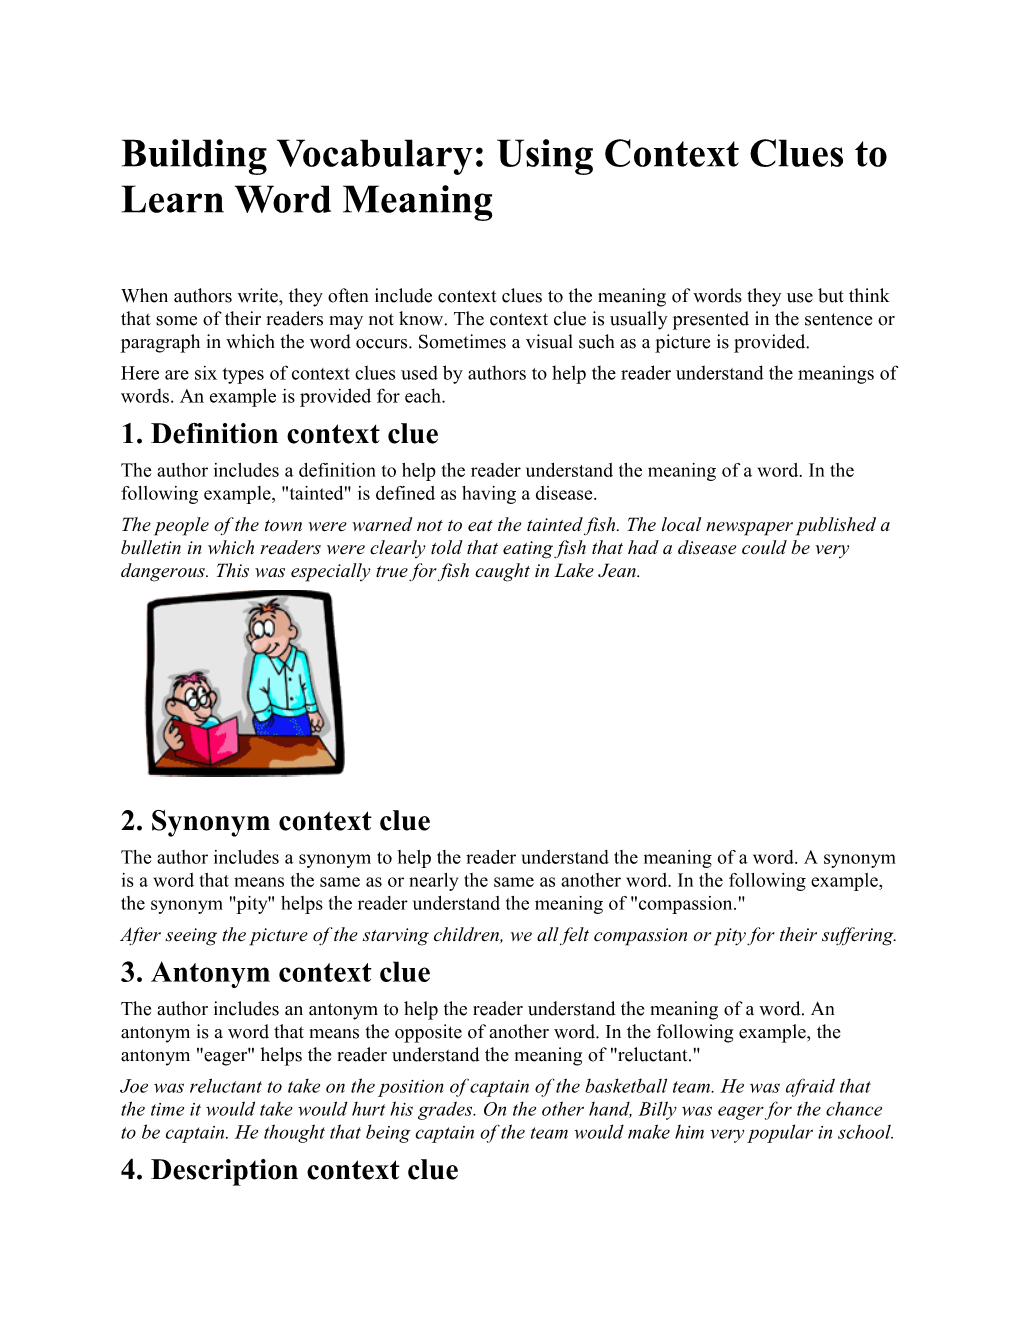 Building Vocabulary: Using Context Clues to Learn Word Meaning